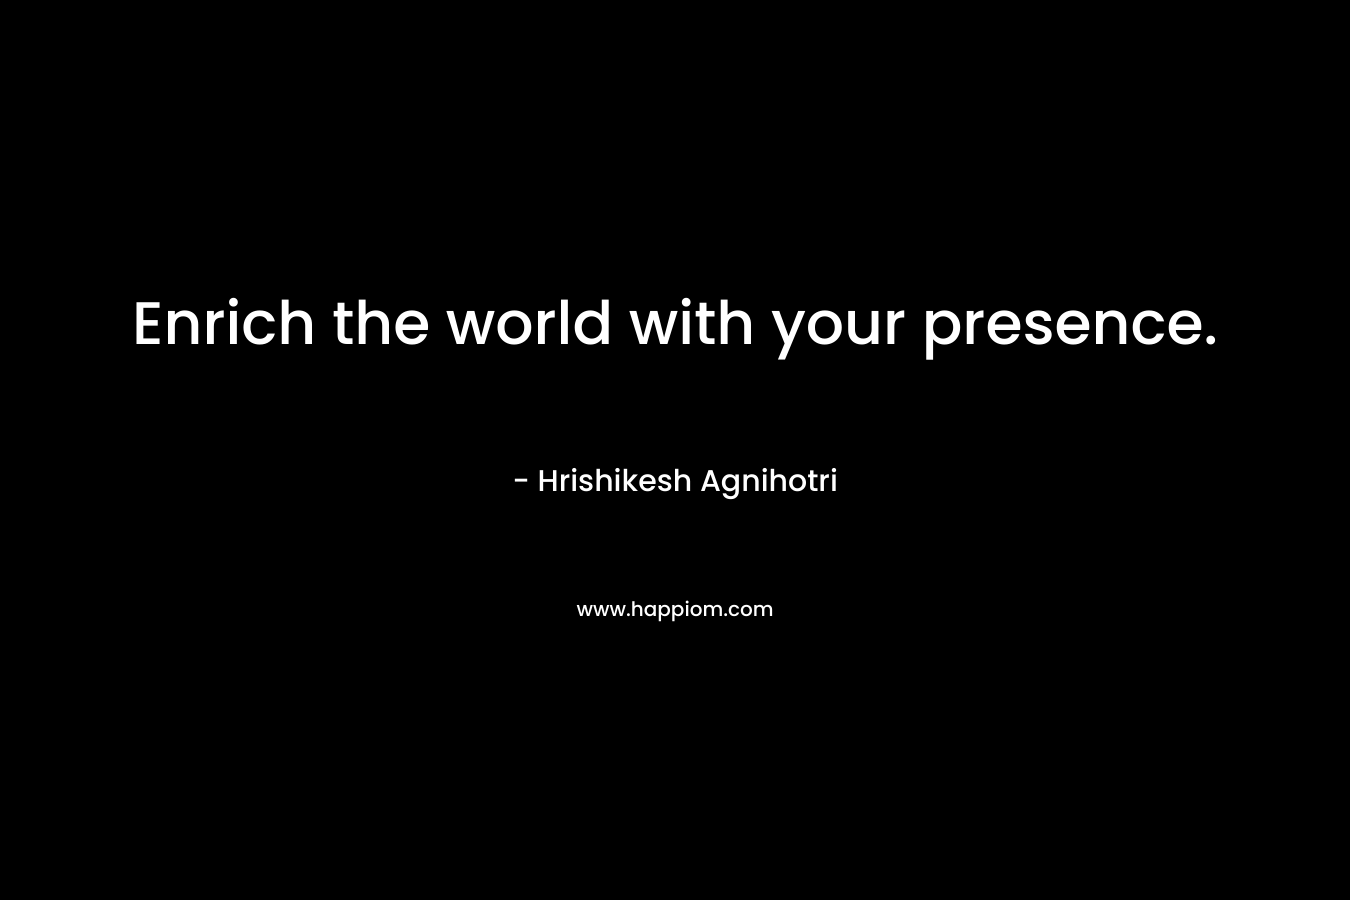 Enrich the world with your presence. – Hrishikesh Agnihotri